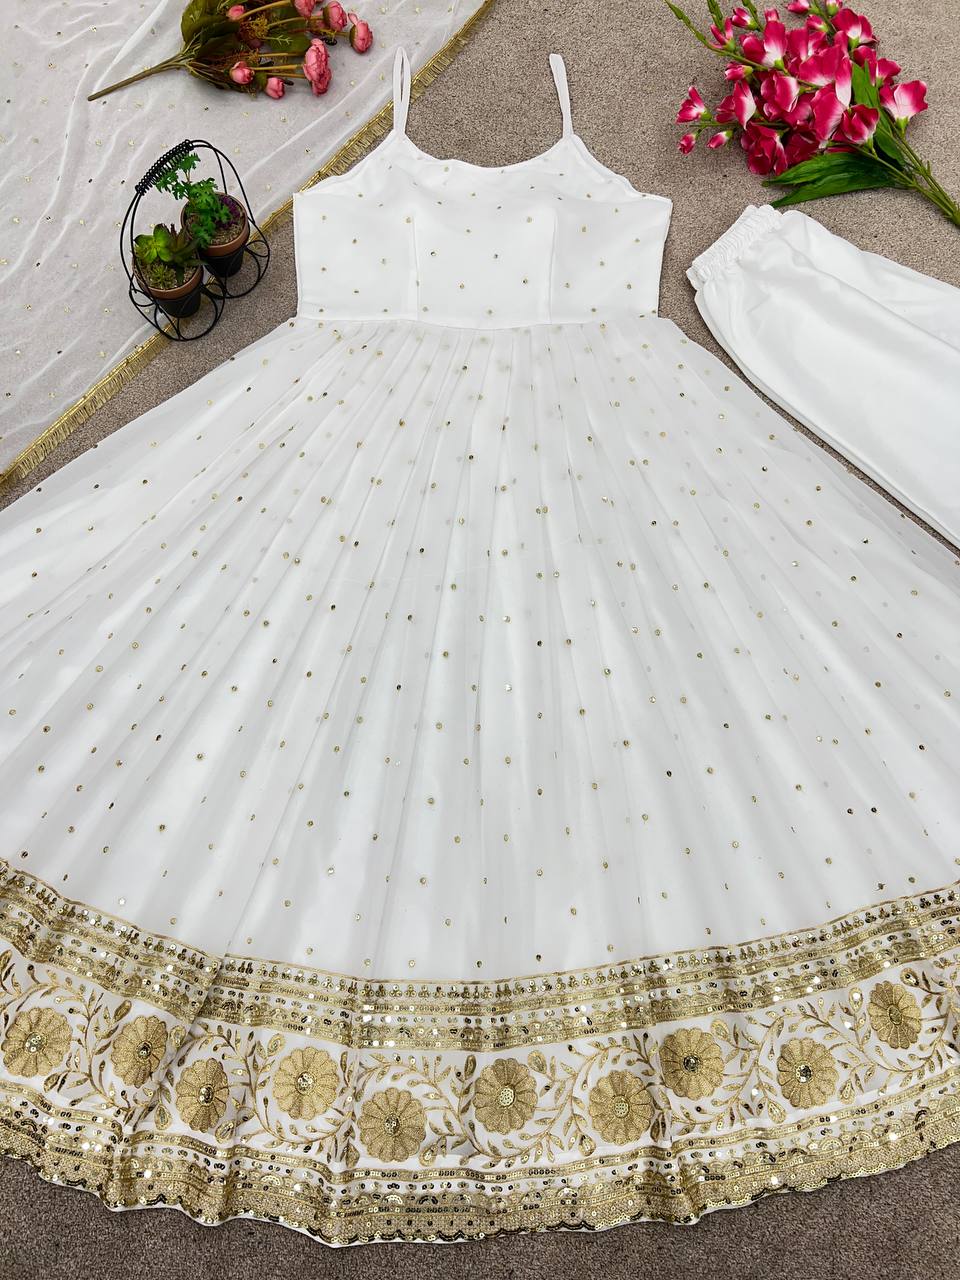 Off White Anarkali Suit With Lucknowi Resham Embroidered Checks Jaal And  Colorful Floral Design On The Hem | Off white anarkali, White anarkali,  Long kurti designs